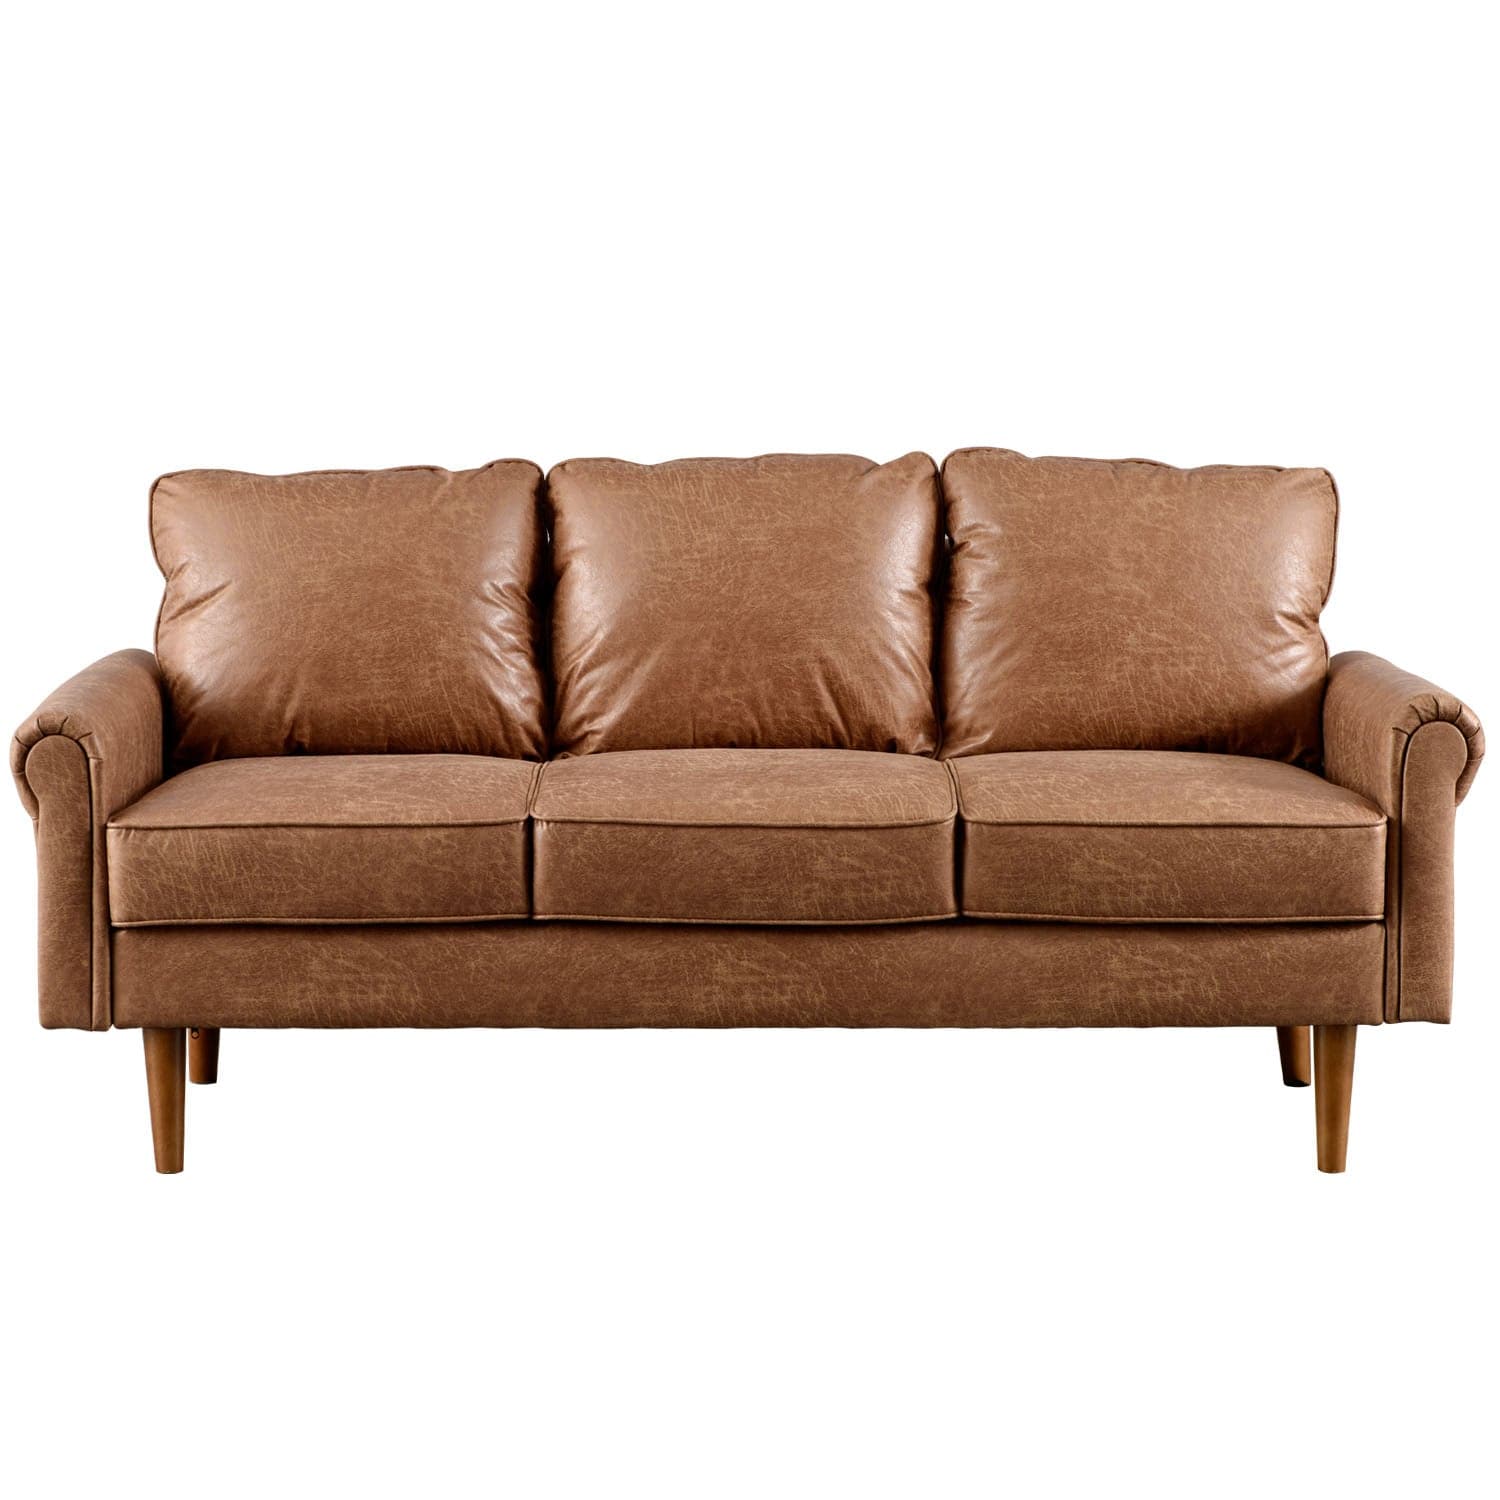 Ovios Living Room 73.6'' Wide Suede or Line Fabric Sofa, 6 Colors